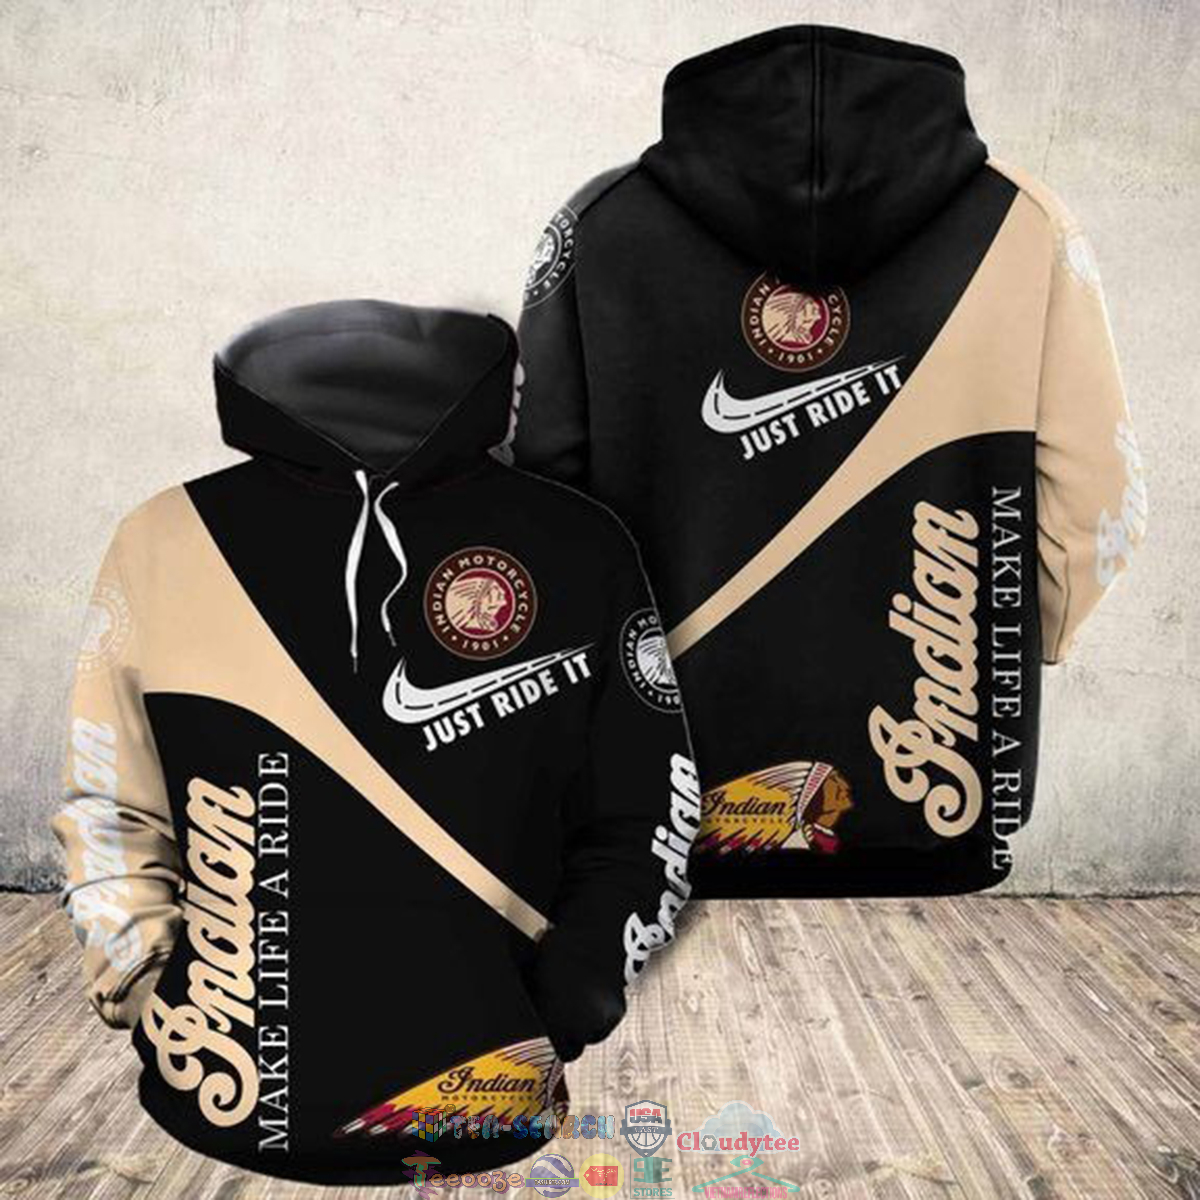 Indian Motorcycle Just Ride It 3D hoodie and t-shirt